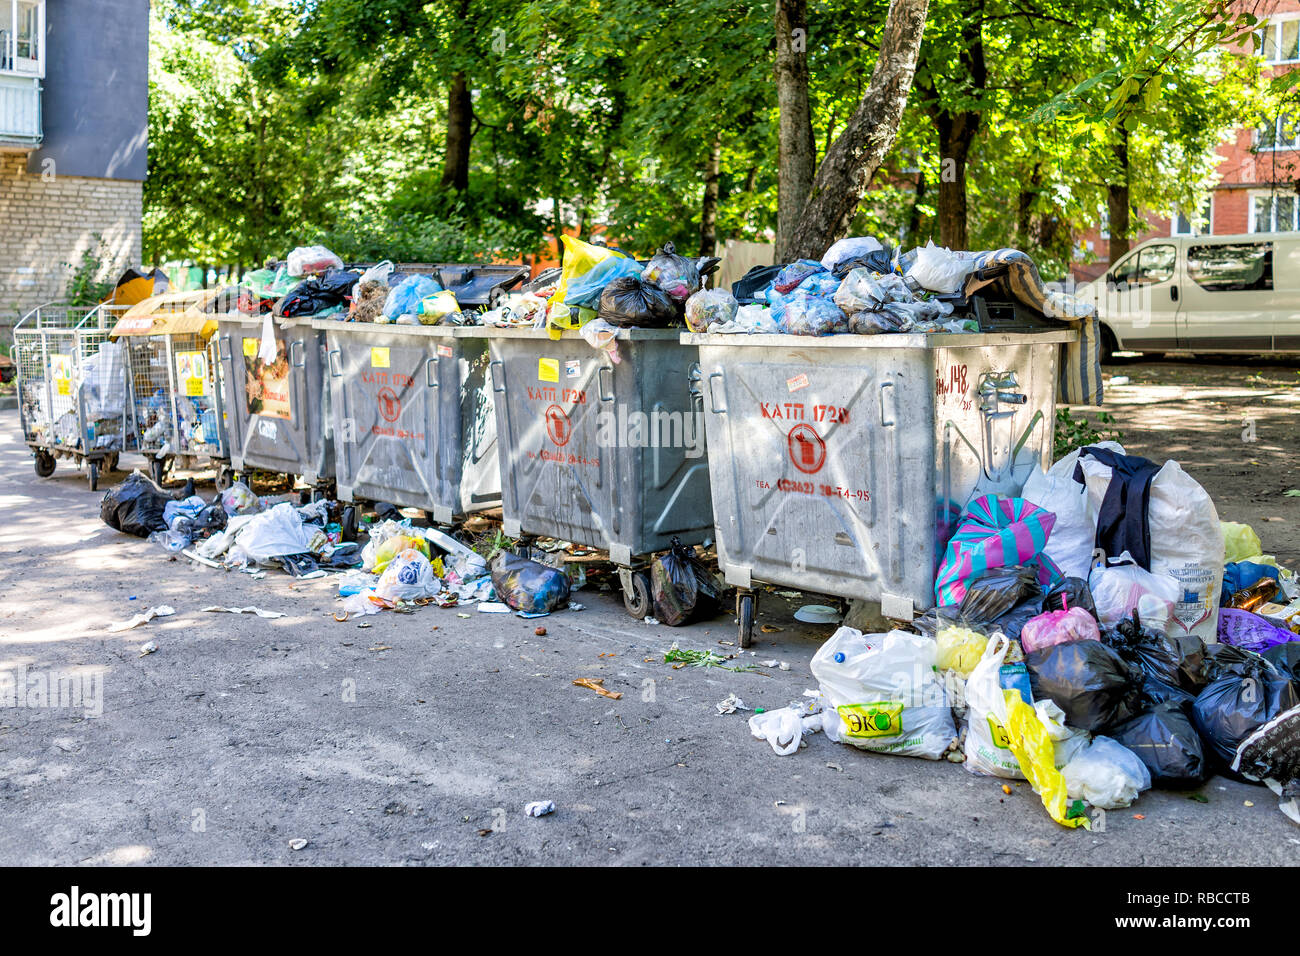 https://c8.alamy.com/comp/RBCCTB/rivne-ukraine-july-4-2018-overflowing-dirty-dumpster-with-trash-rubbish-on-the-ground-in-ukrainian-city-with-cyrillic-signs-plastic-grocery-bags-RBCCTB.jpg